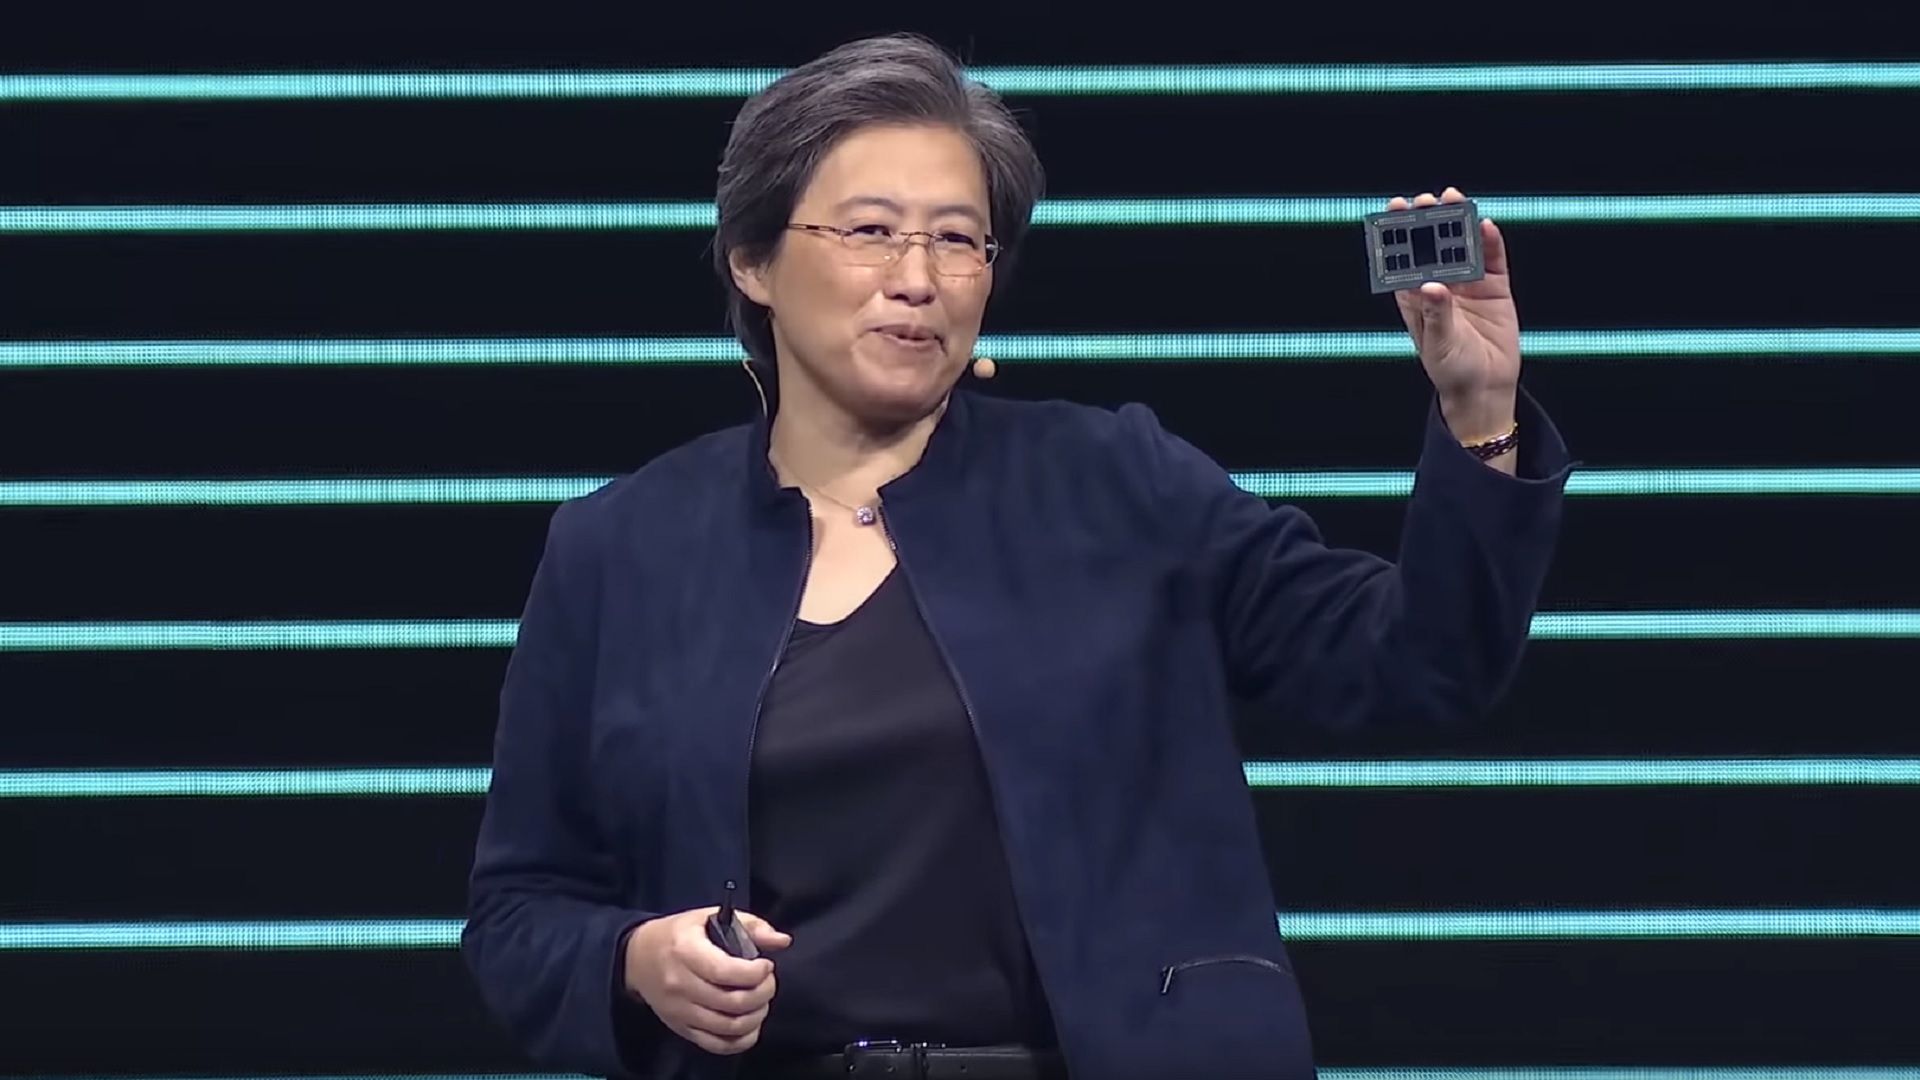 AMD shows off 3990 flagship Ryzen Threadripper 3990X processor and more image 1